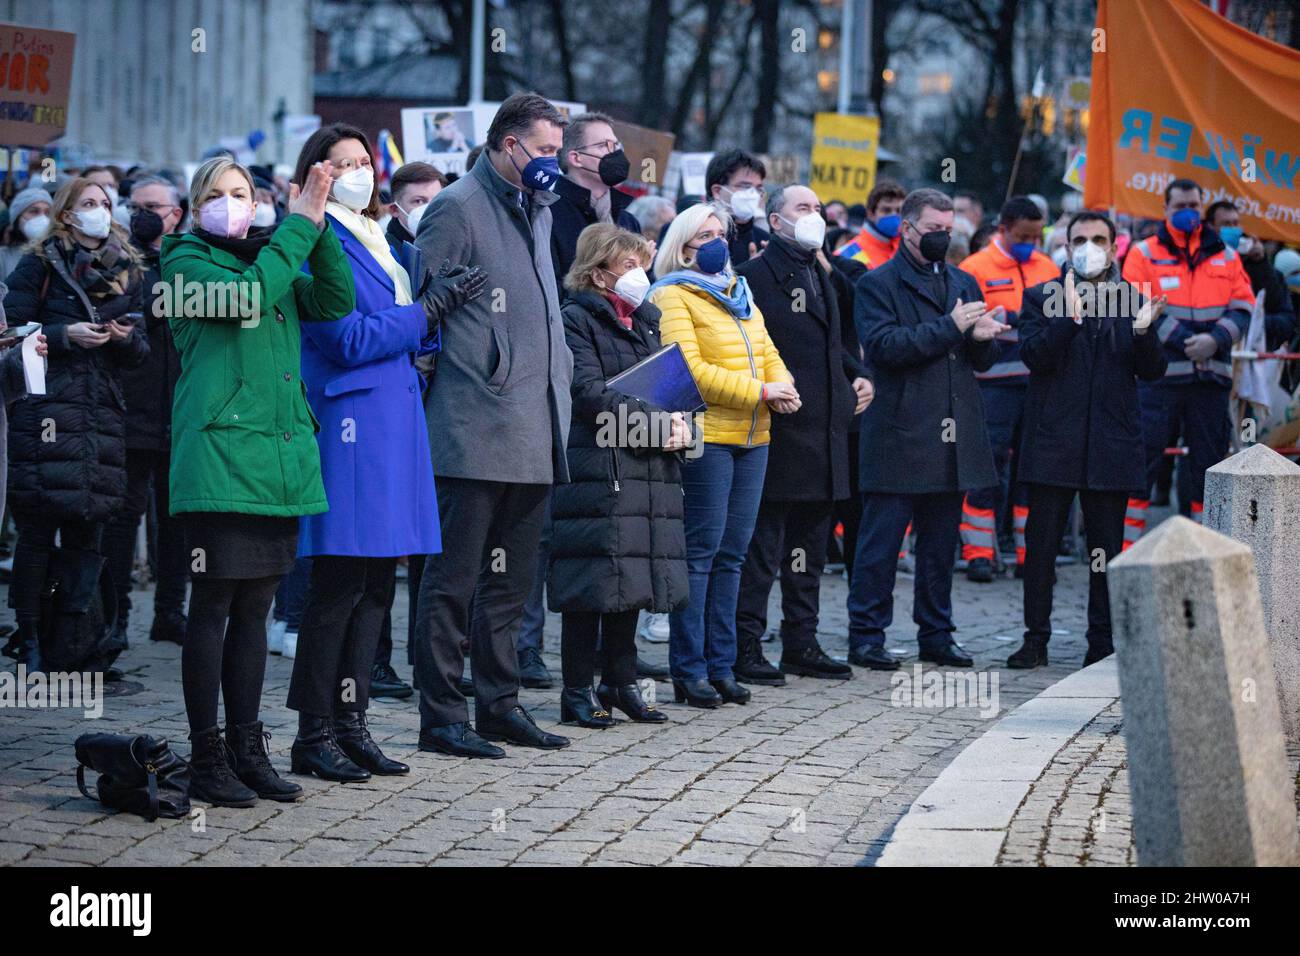 Munich, Germany. 02nd Mar, 2022. L-R: Katahrina Schulze, Ilse Aigner, Stephan Mayer, Charlotte Knobloch, Melanie Huml, Hubert Aiwager, Christian Bernreiter, Klaus Holetschek. On March 2nd, 2022 45,000 people gathered at Koenigsplatz in Munich, Germany to protest against the Russian invasion in the Ukraine and to show their solidarity with the Ukranian people. The rally was organized by the SPD and all democratic parties joined it. (Photo by Alexander Pohl/Sipa USA) Credit: Sipa USA/Alamy Live News Stock Photo